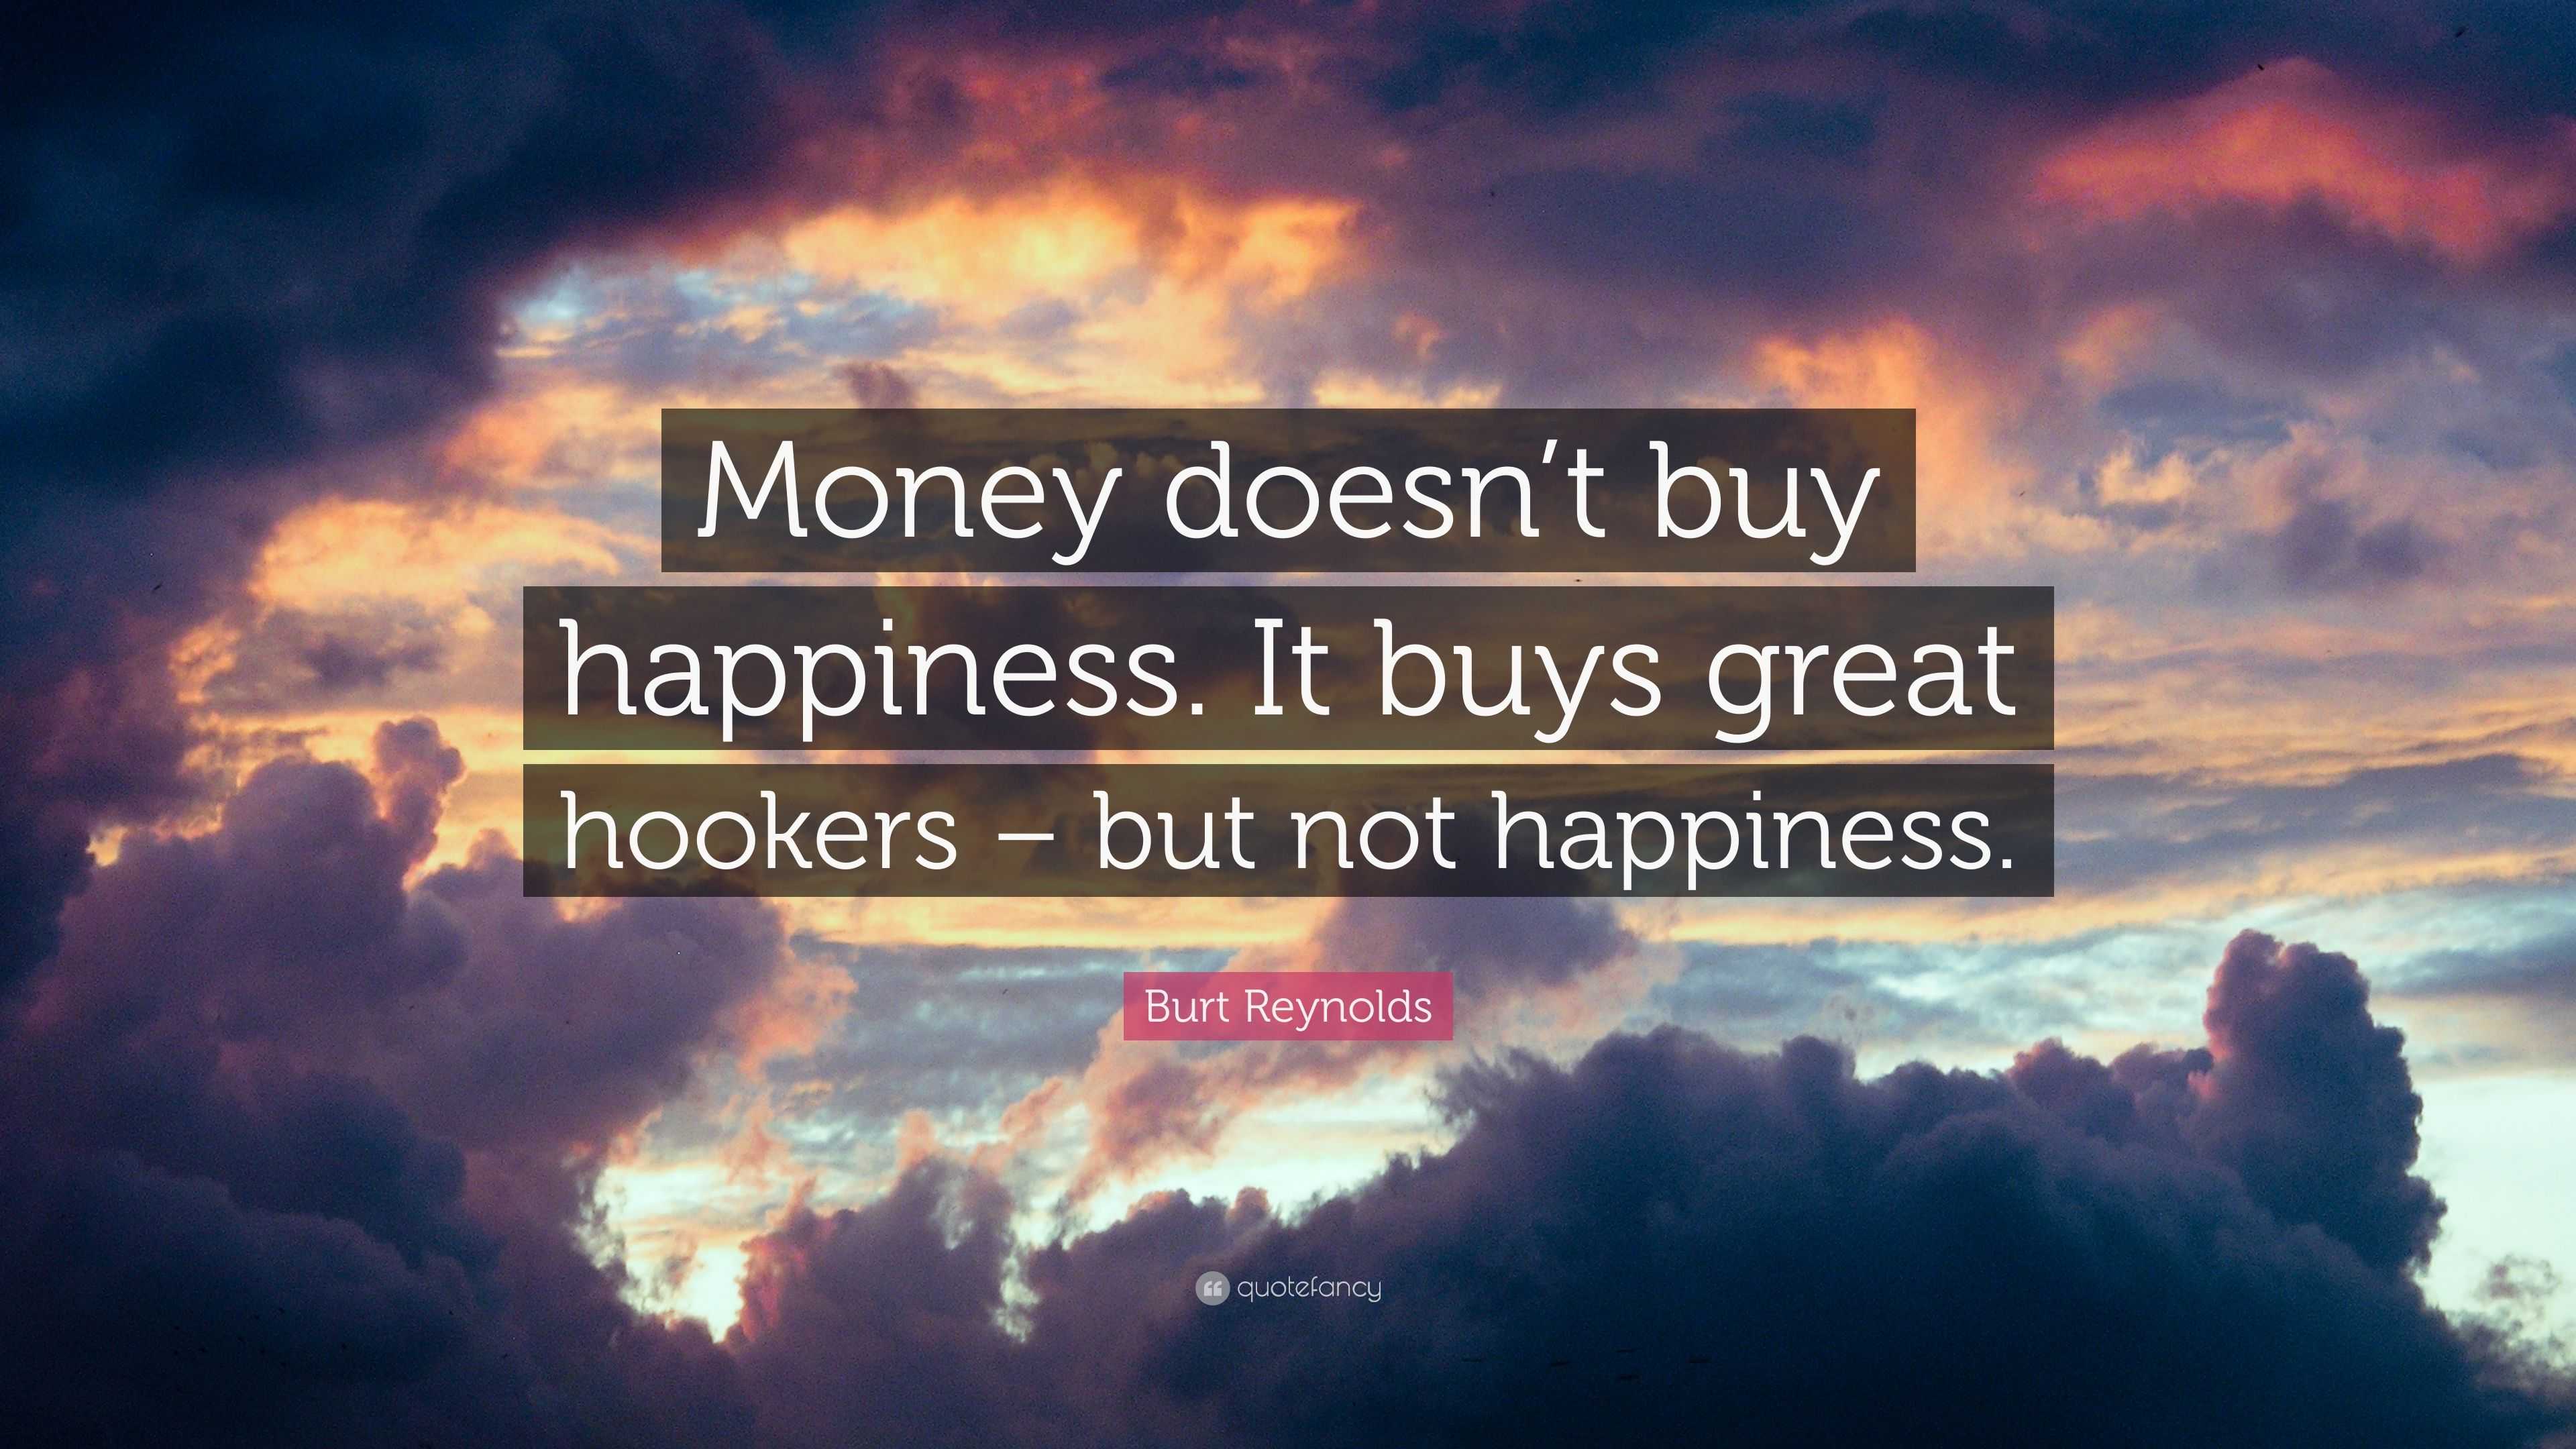 Burt Reynolds Quote: "Money doesn't buy happiness. It buys great hookers - but not happiness ...